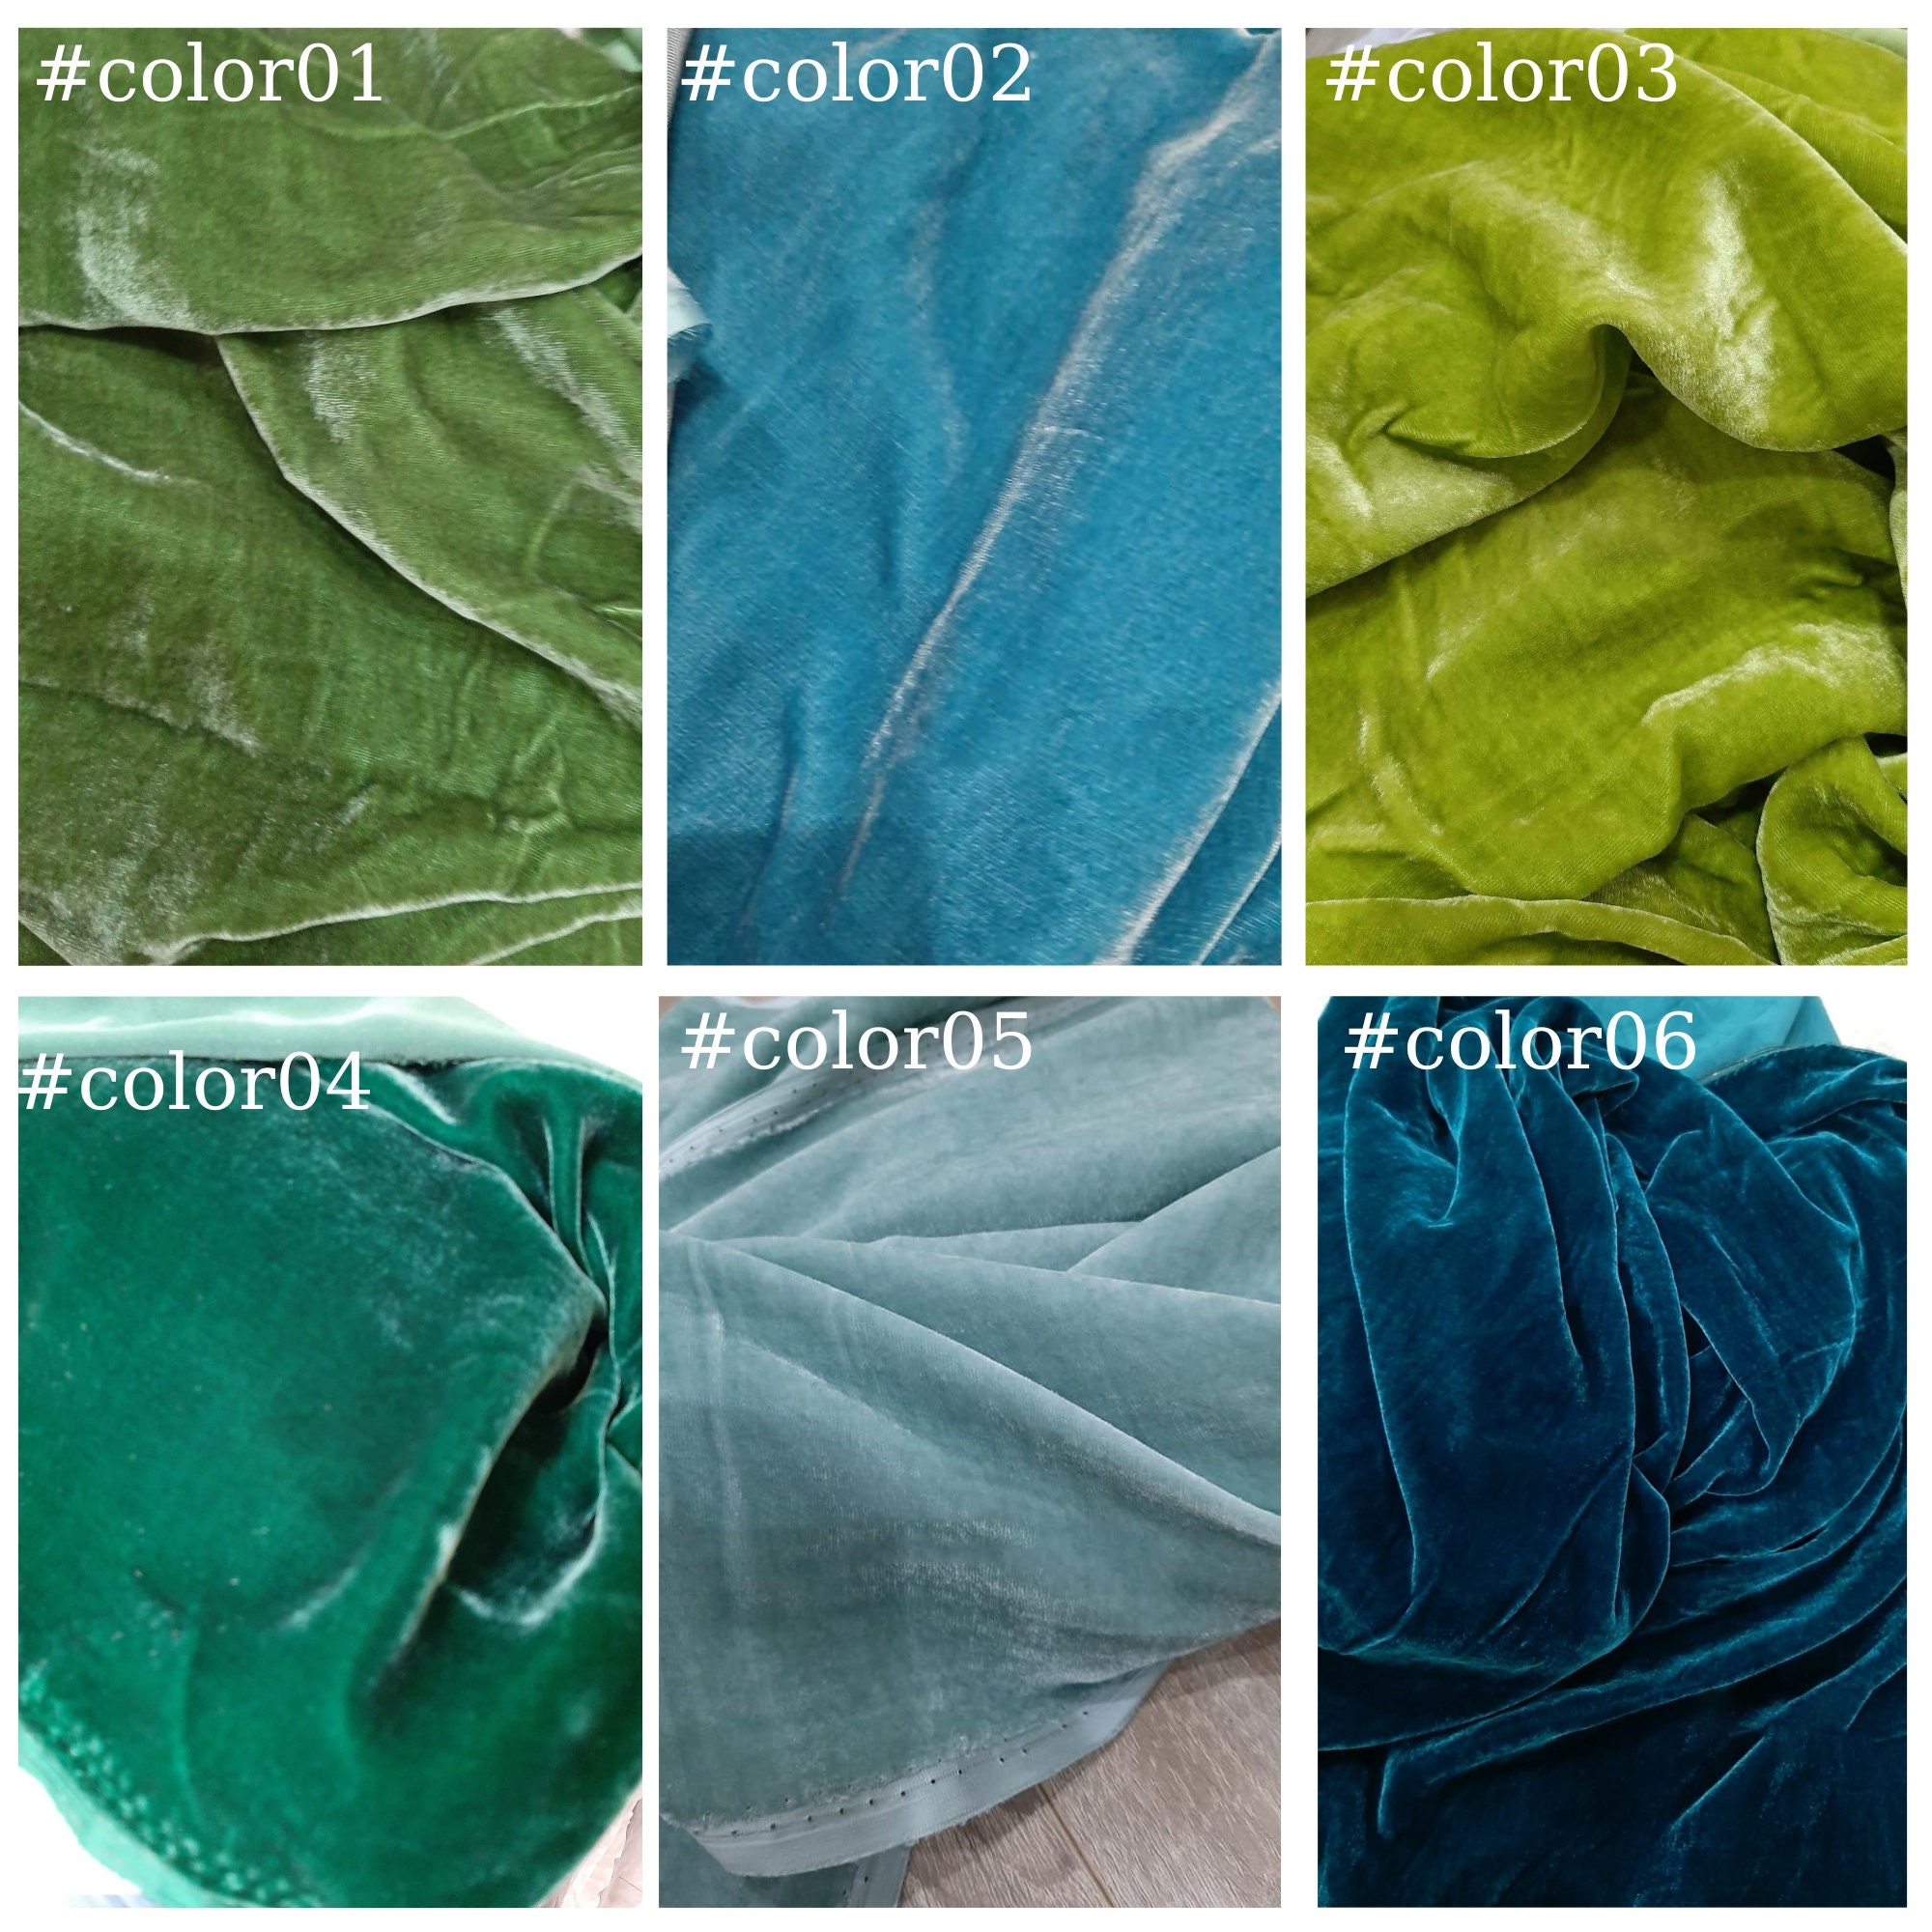 Pure Silk Velvet Fabric Royal Green Color 40momme Luxury Thick